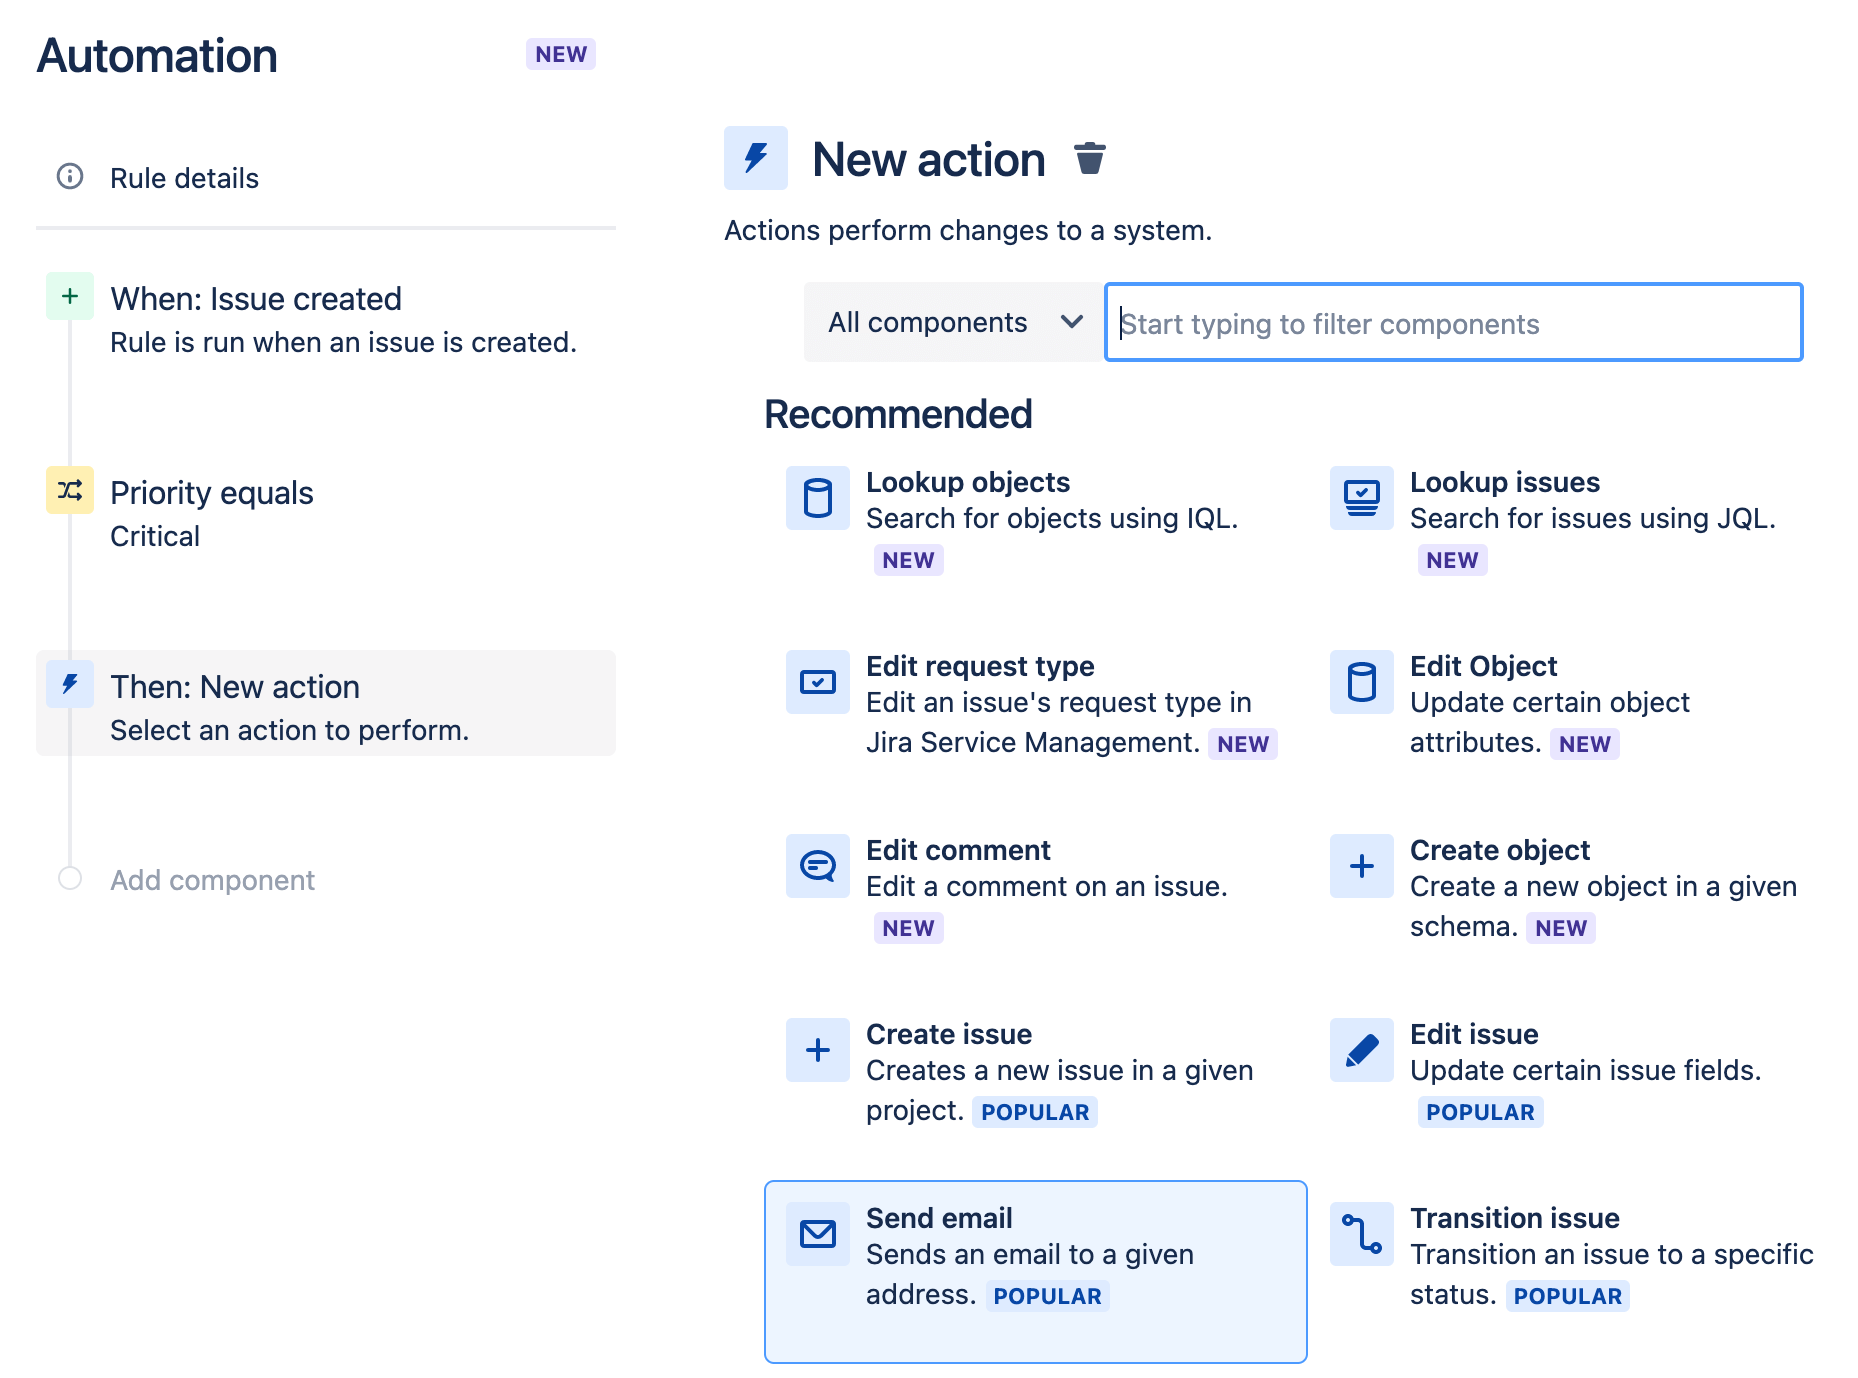 Selecting actions for automation in Jira Service Management